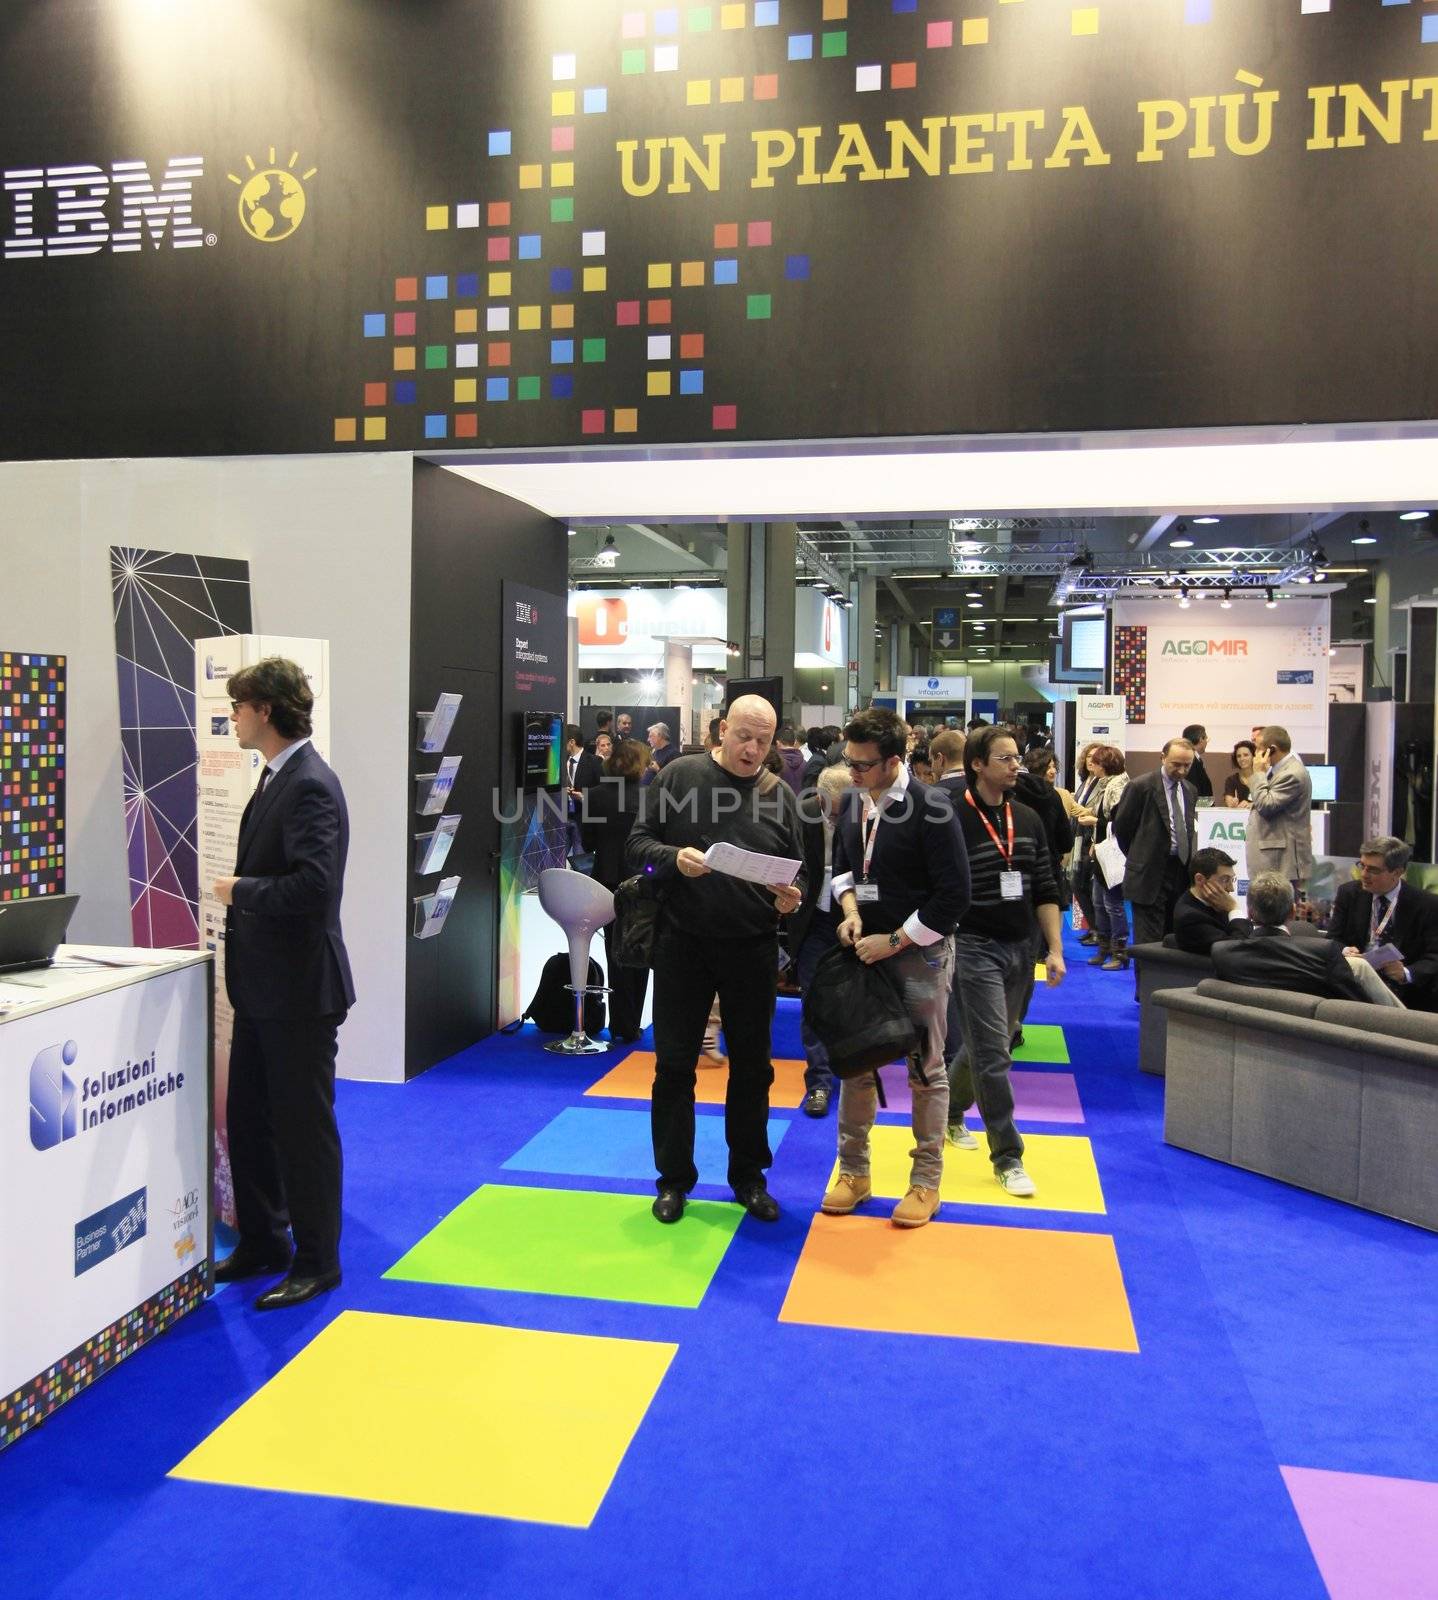 MILAN, ITALY - OCTOBER 17: People visit IBM technologies products exhibition area at SMAU, international fair of business intelligence and information technology October 17, 2012 in Milan, Italy.